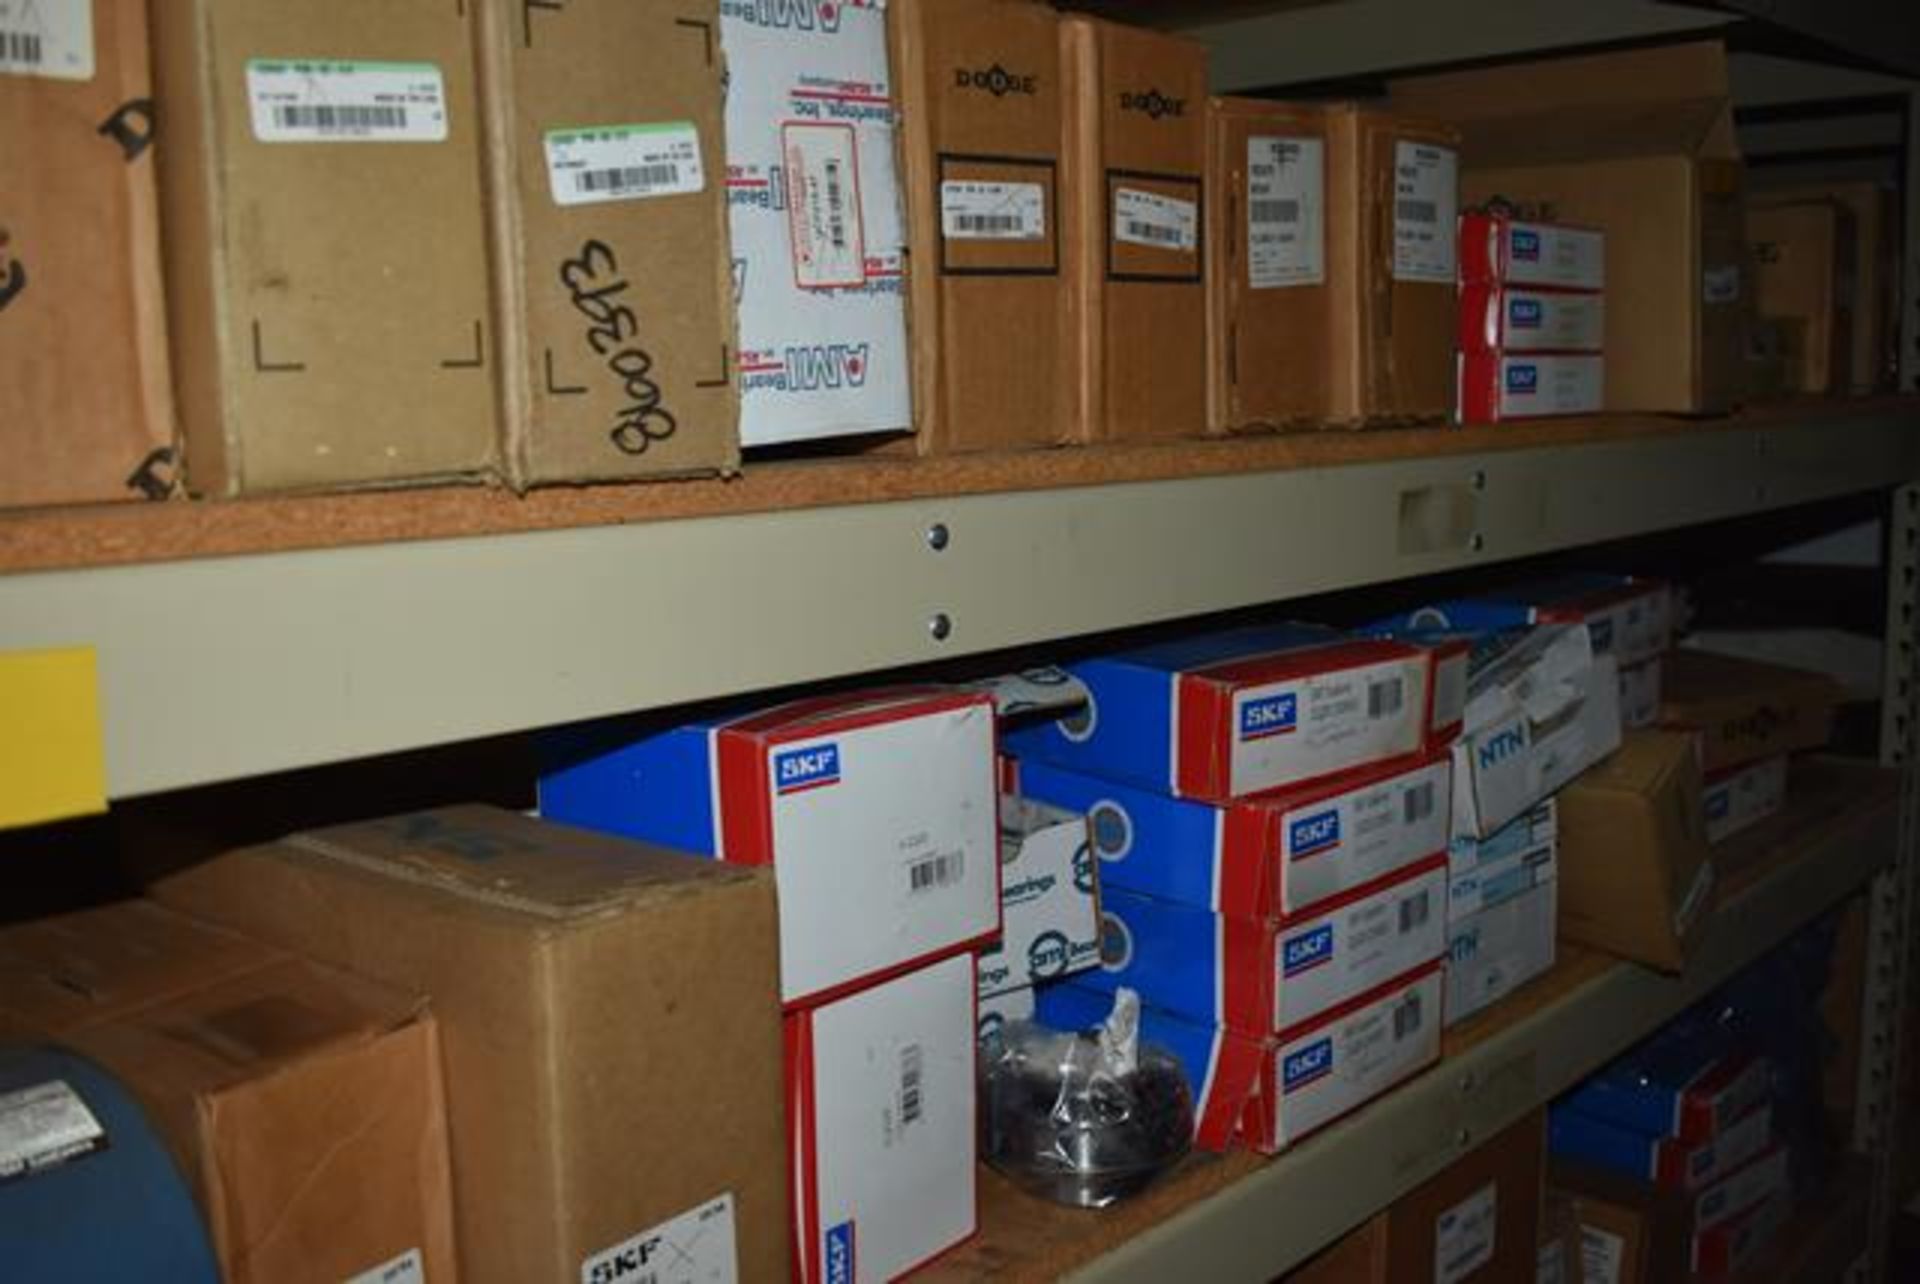 Stores Area Contents - (12) Shelf Sections, Bearings, Burner Parts, Eaton/Allen Bradley Electrical - Image 4 of 7